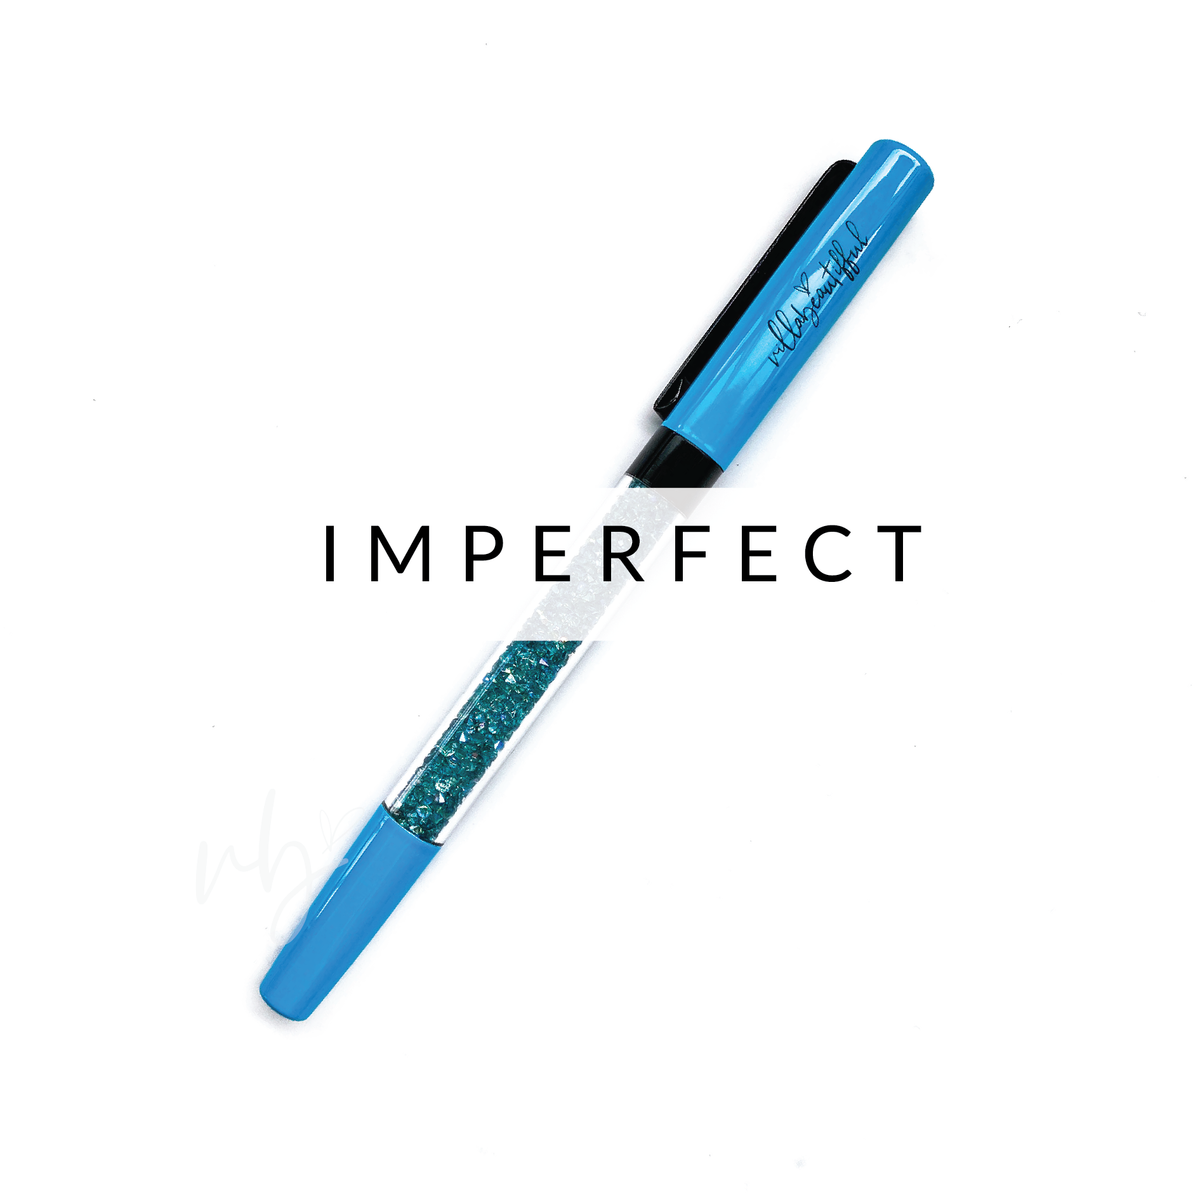 Dude Imperfect Crystal VBPen | limited pen